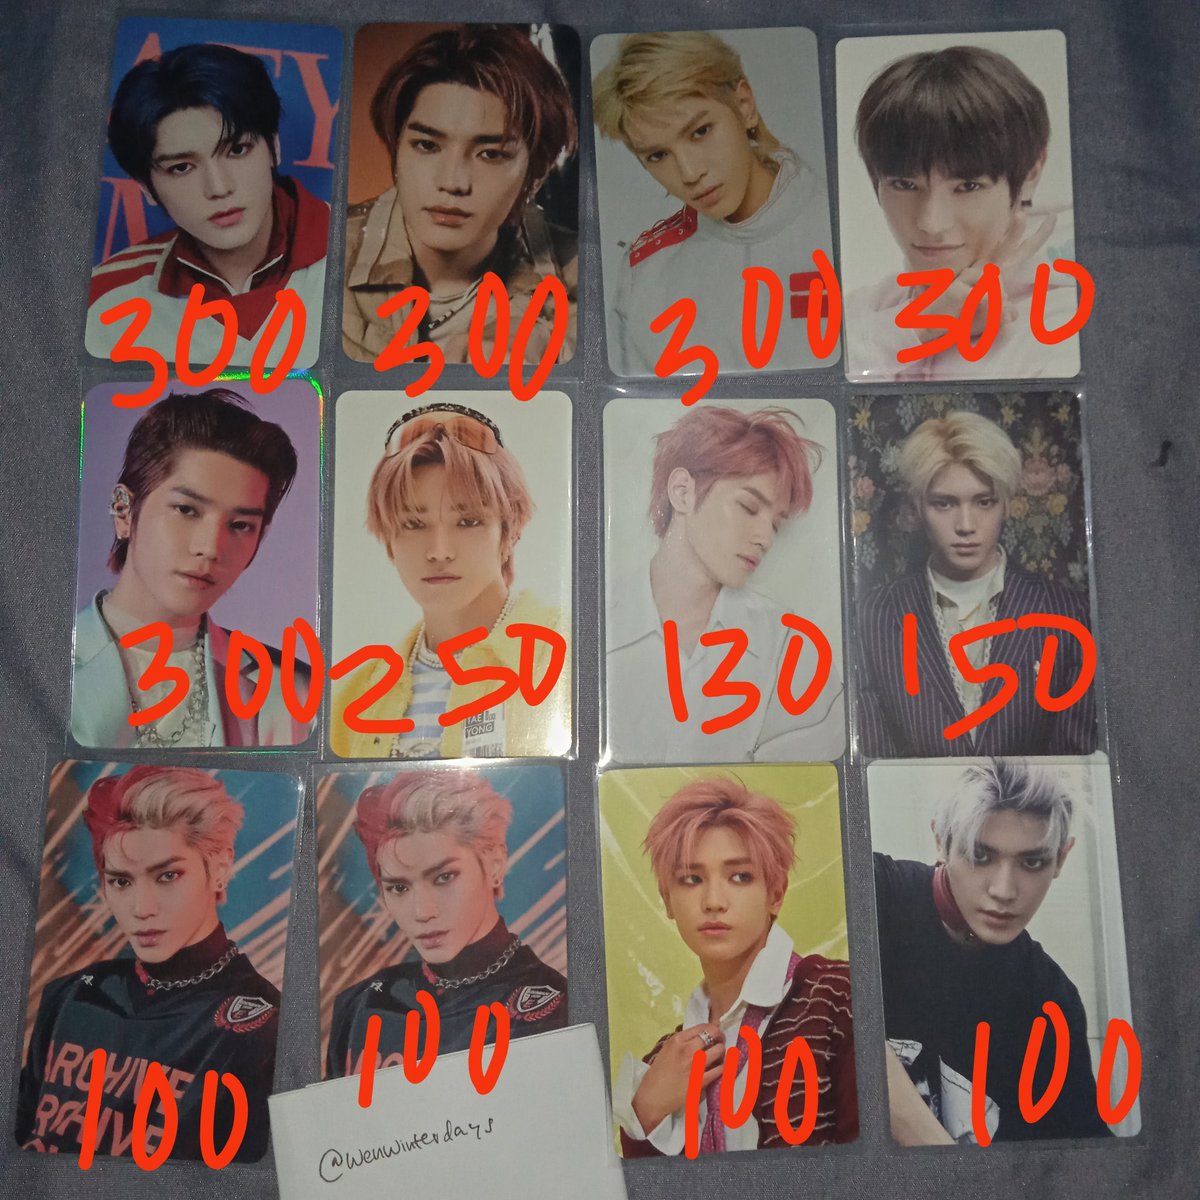 WTS want to sell aab taeyong nct 127 photocard
✅each
📍Jateng
shope.ee/1VbB3z0CTX
Ty pc only neo city neocity Bangkok ecobag superm superone todoroki mini poster sum anniv anniversary binder tablet pouch resonance sticker set cherry bomb cherrybomb fire truck departure sg18